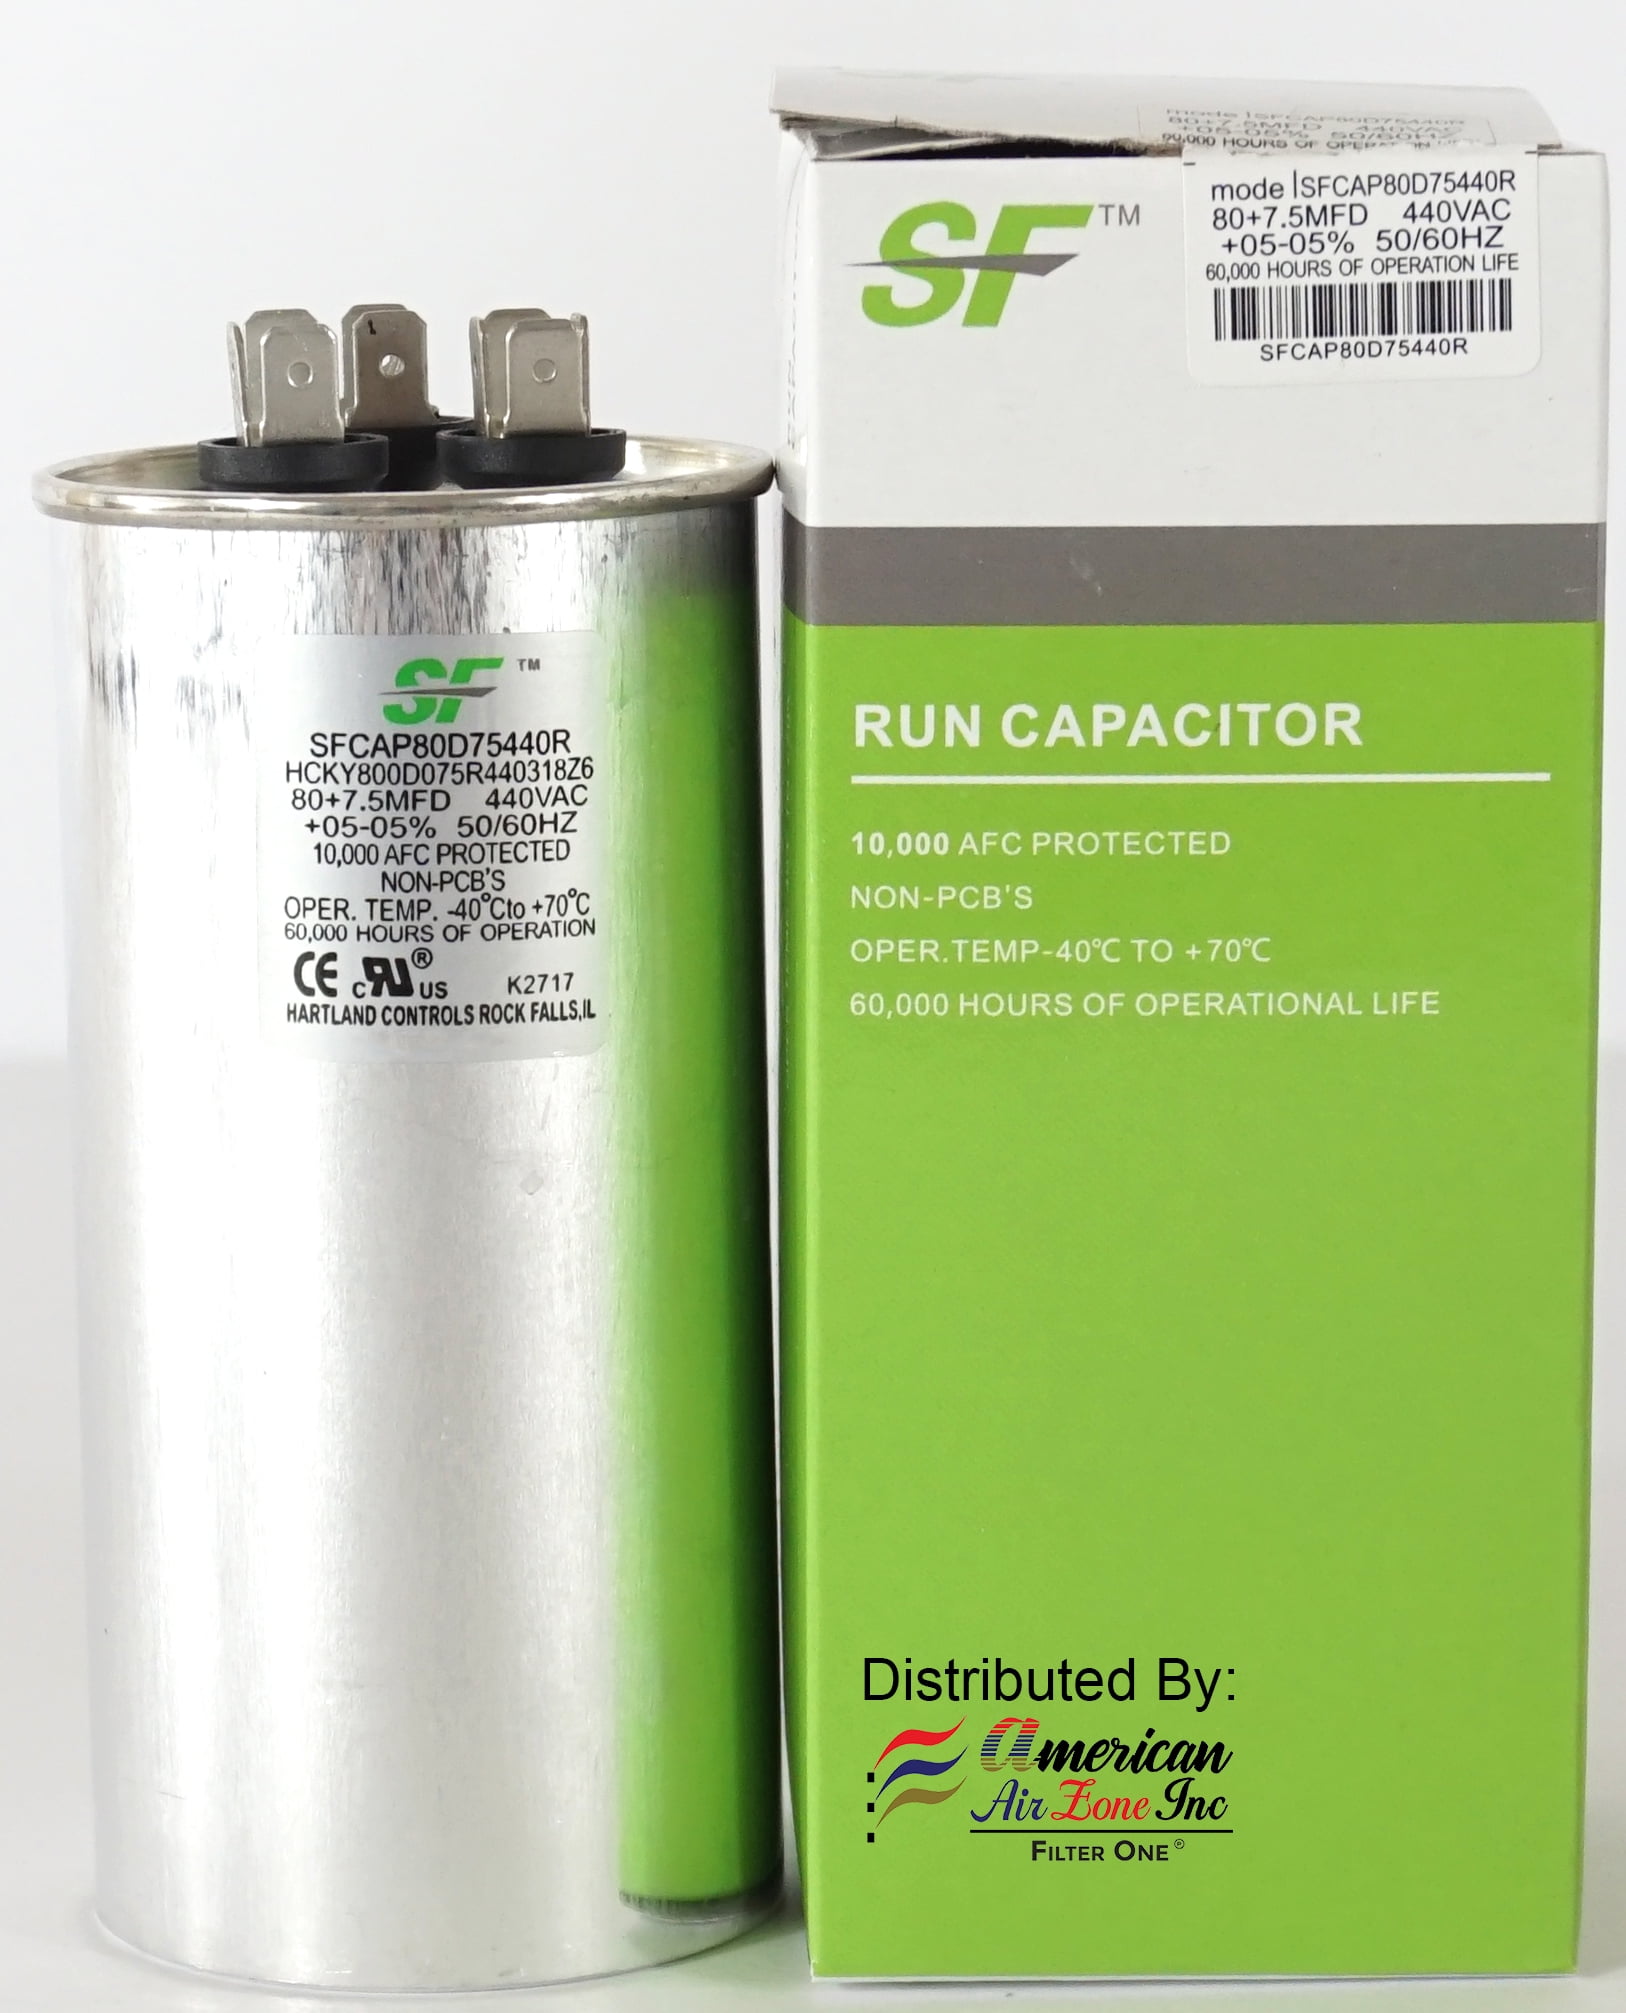 MicroFarad TRANE SF 70 MFD Fans or AC Compressors Single Run Capacitor Round Replaces other Brands Capacitors 1-Pack 370/440 Volts for Motors 